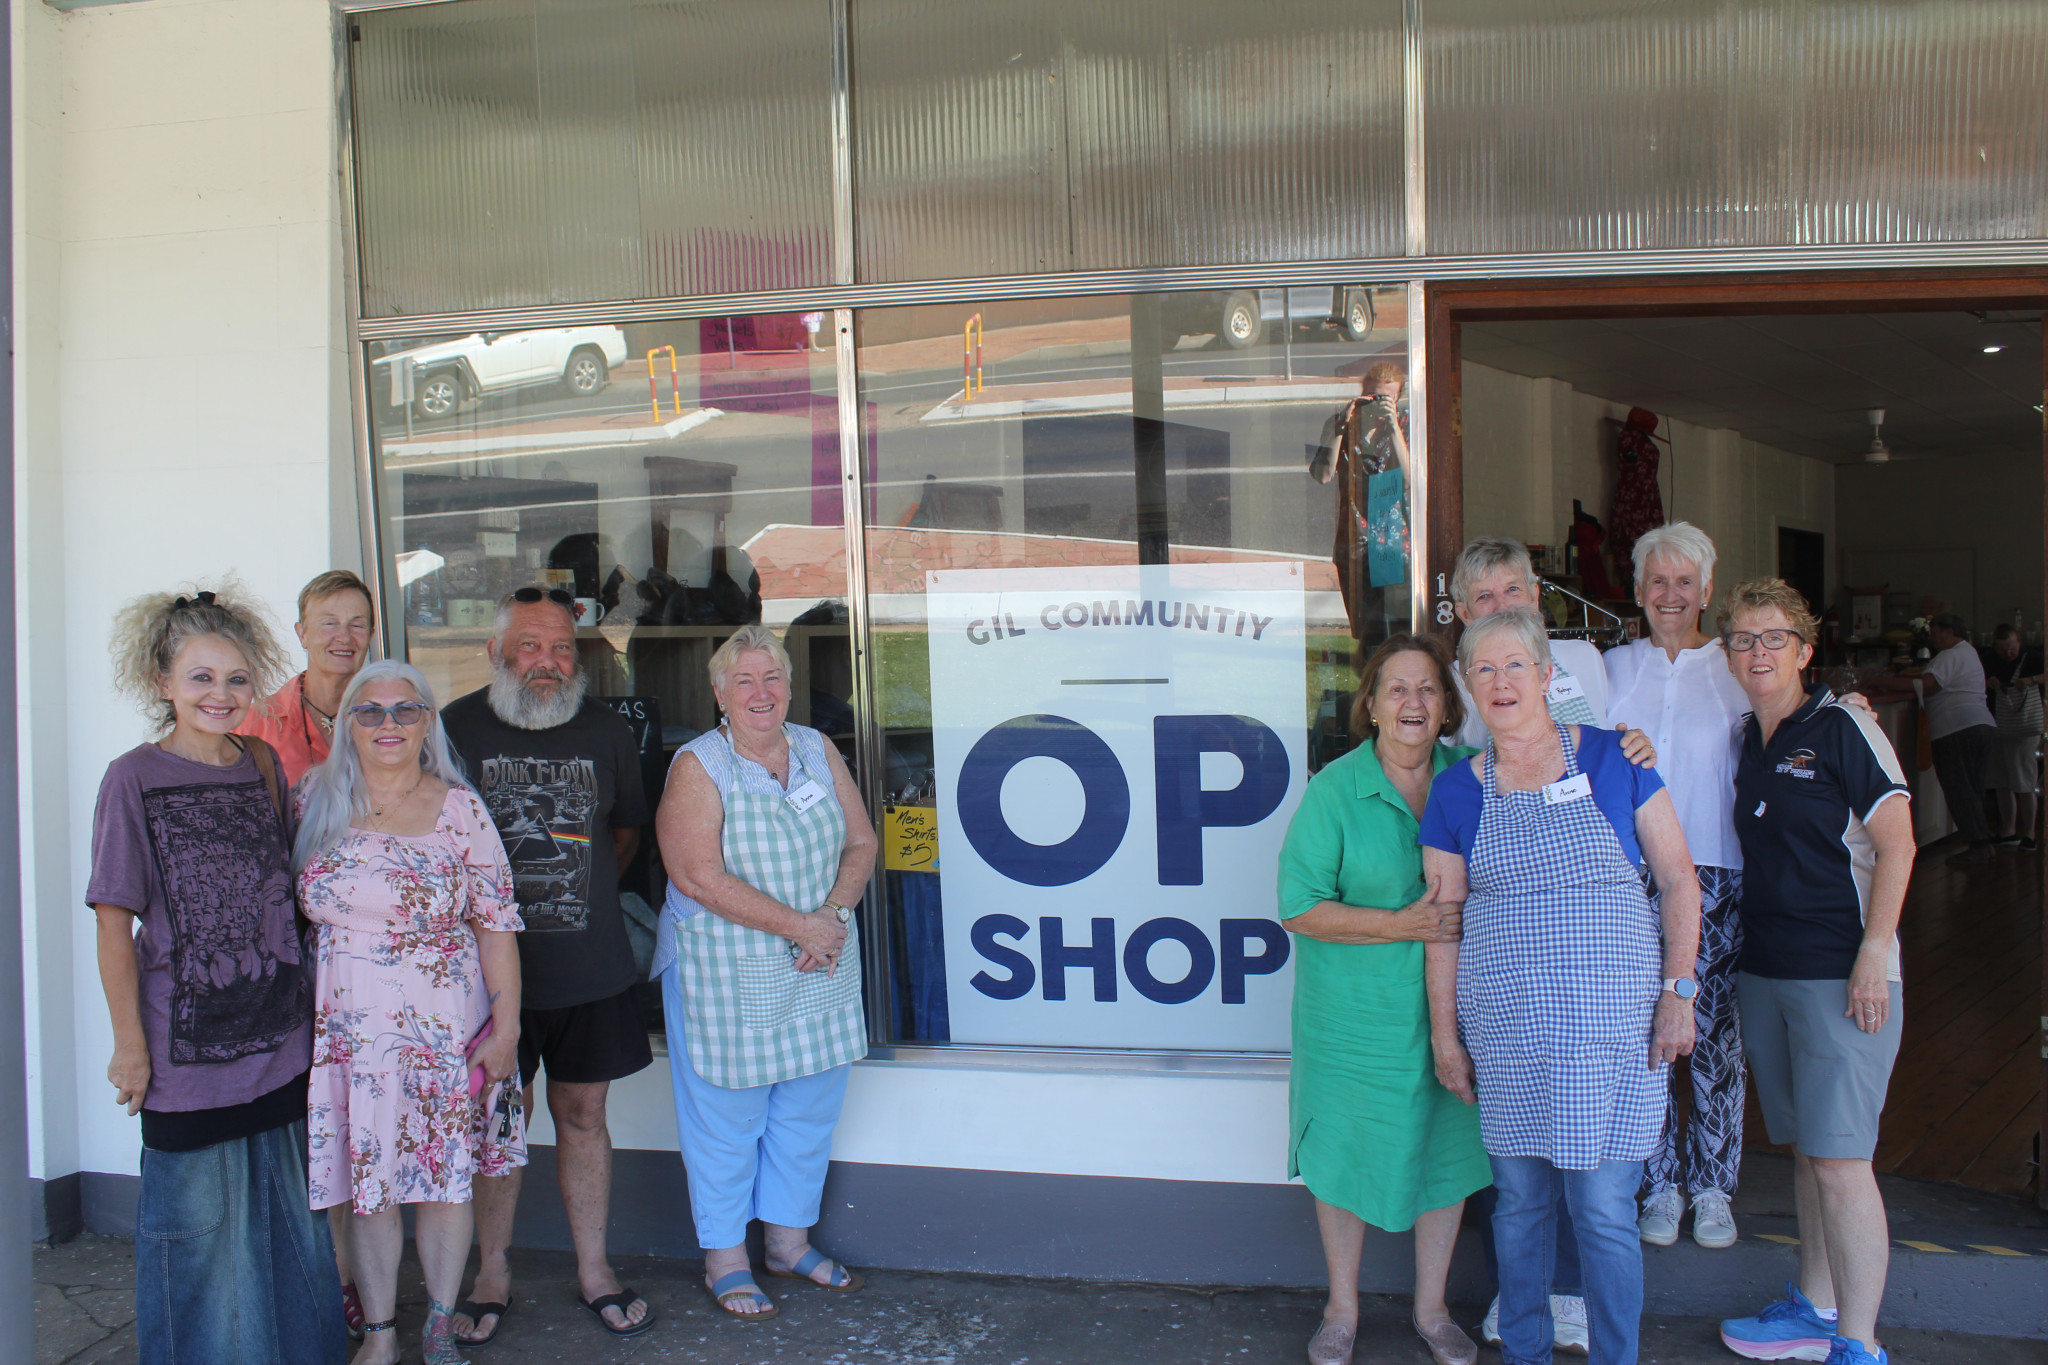 Megan White, Josie Dawson, Kathryn Rogan, Dan Rogan, Anne Armstrong, Sandy McGrath, Anne Hall, Robyn Cook, Helen Oates, and Kim Hiscox at the re-opening of the Community Op Shop on Monday, February 12. Photo by The Gilgandra Weekly: Nicholas Croker.